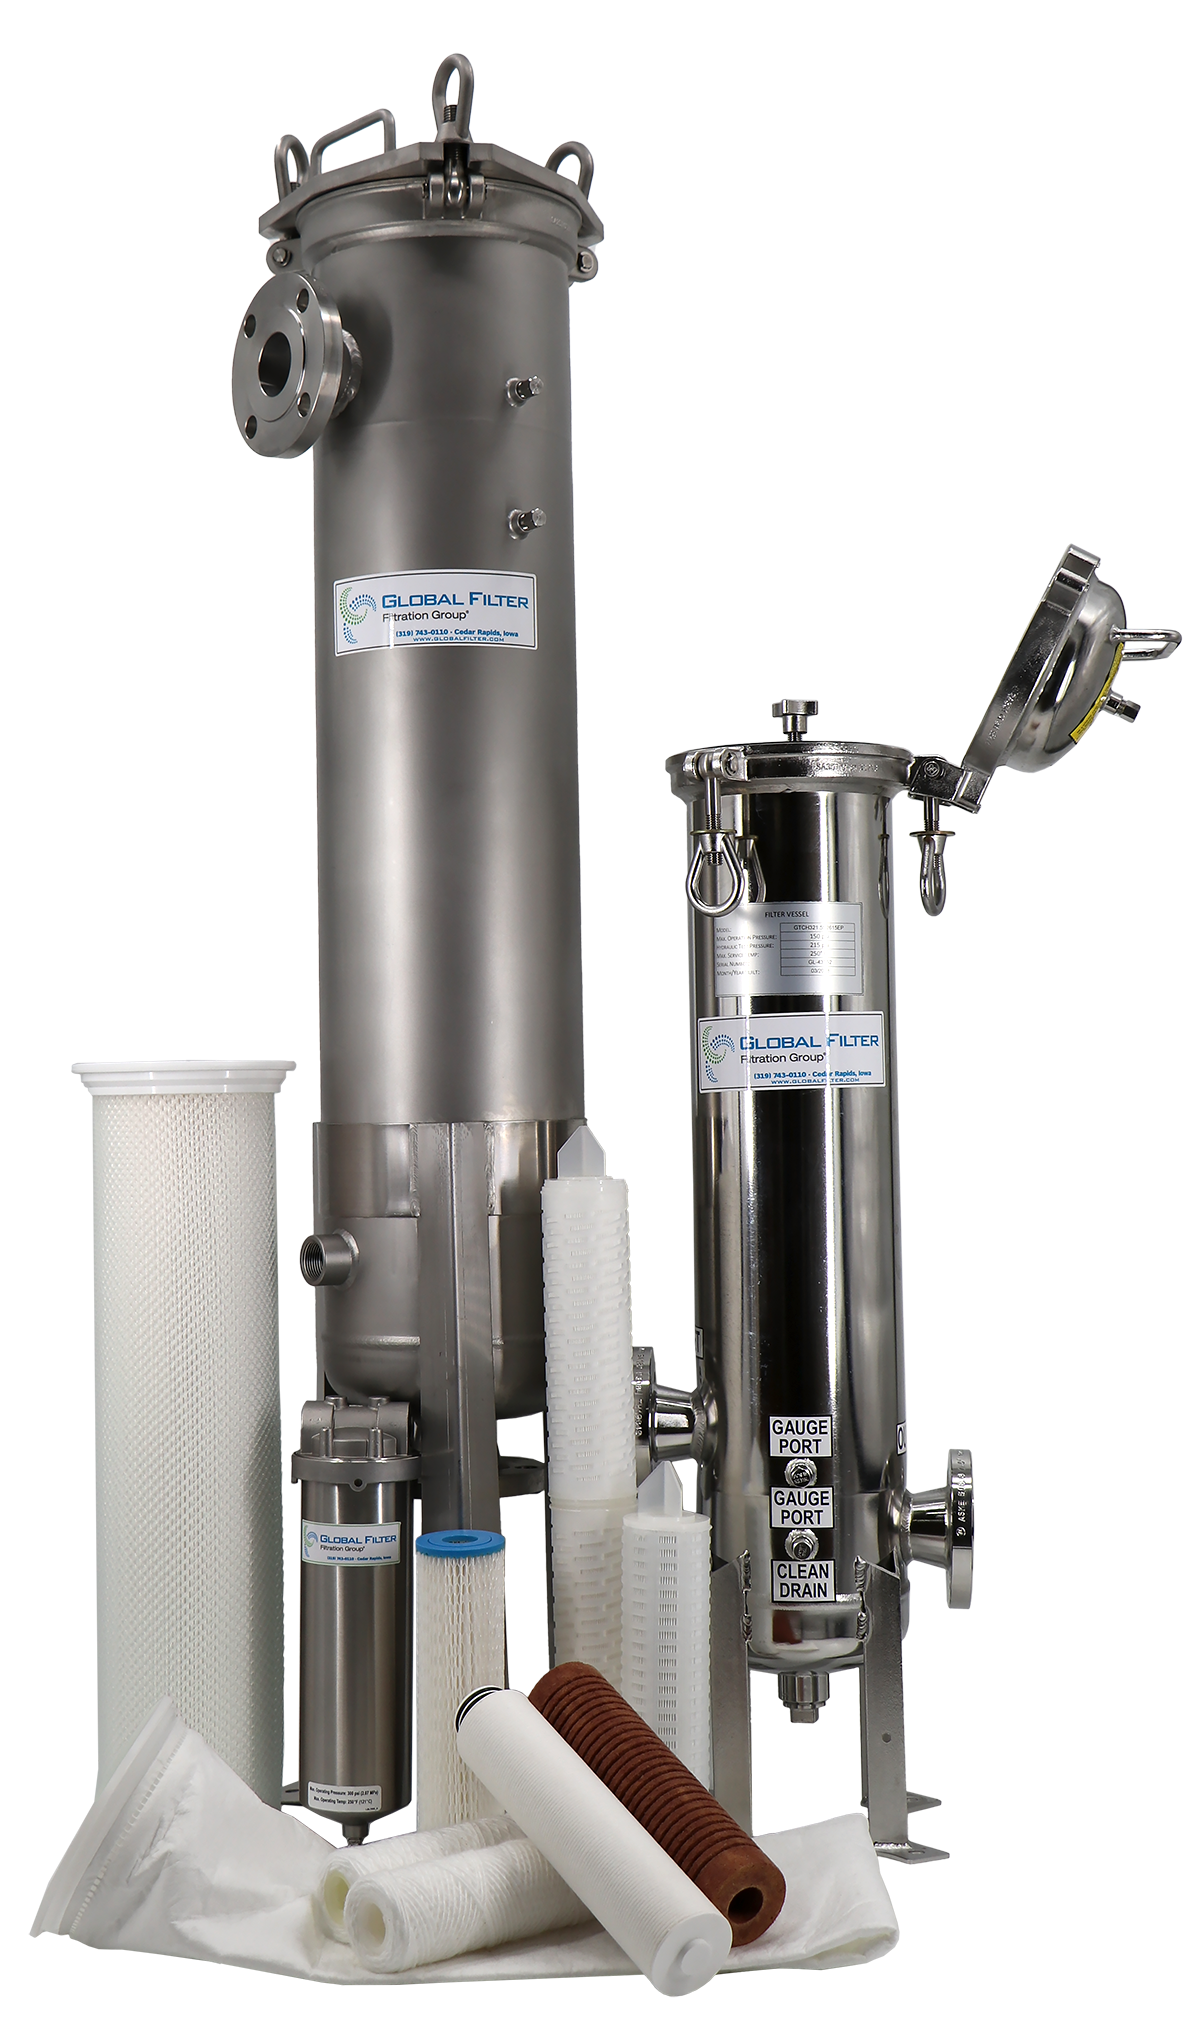 Global Filter manufactures a comprehensive range of filtration products for high-purity process fluids.